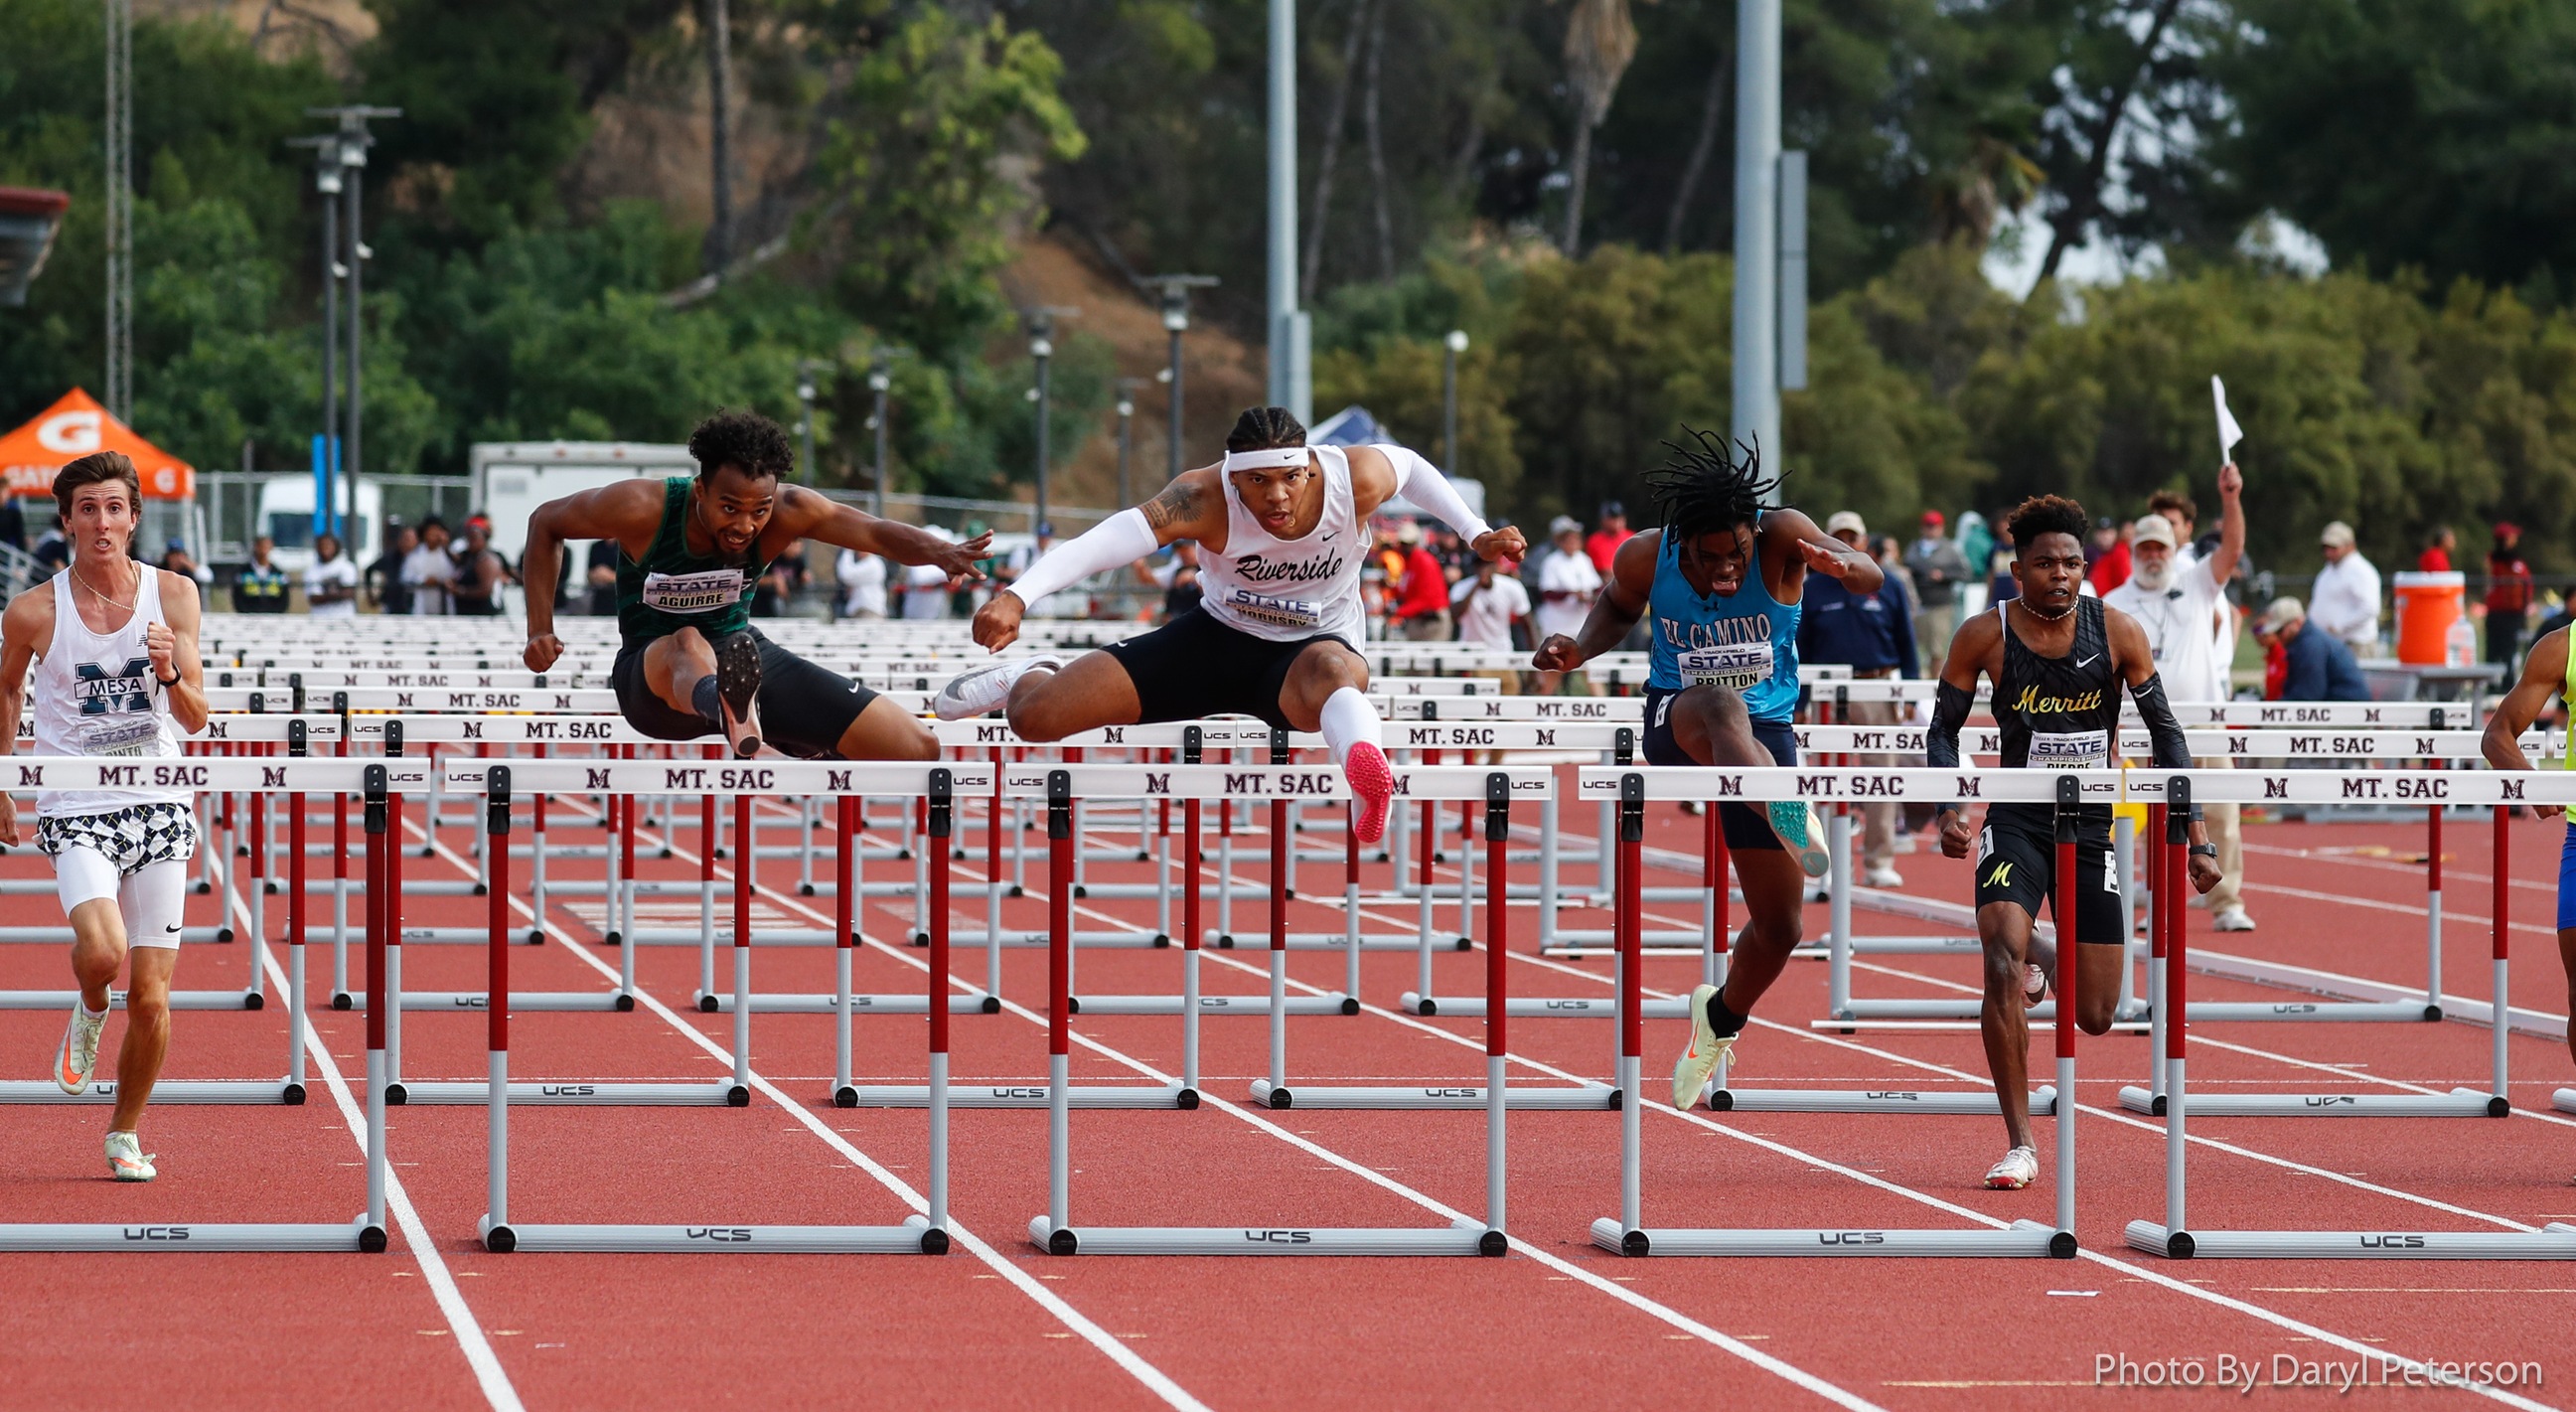 Joshua Hornsby clears the hurdle middle as he wins the 110-meter hurdles state title on Saturday (photo by Daryl Peterson, for CCCAA).